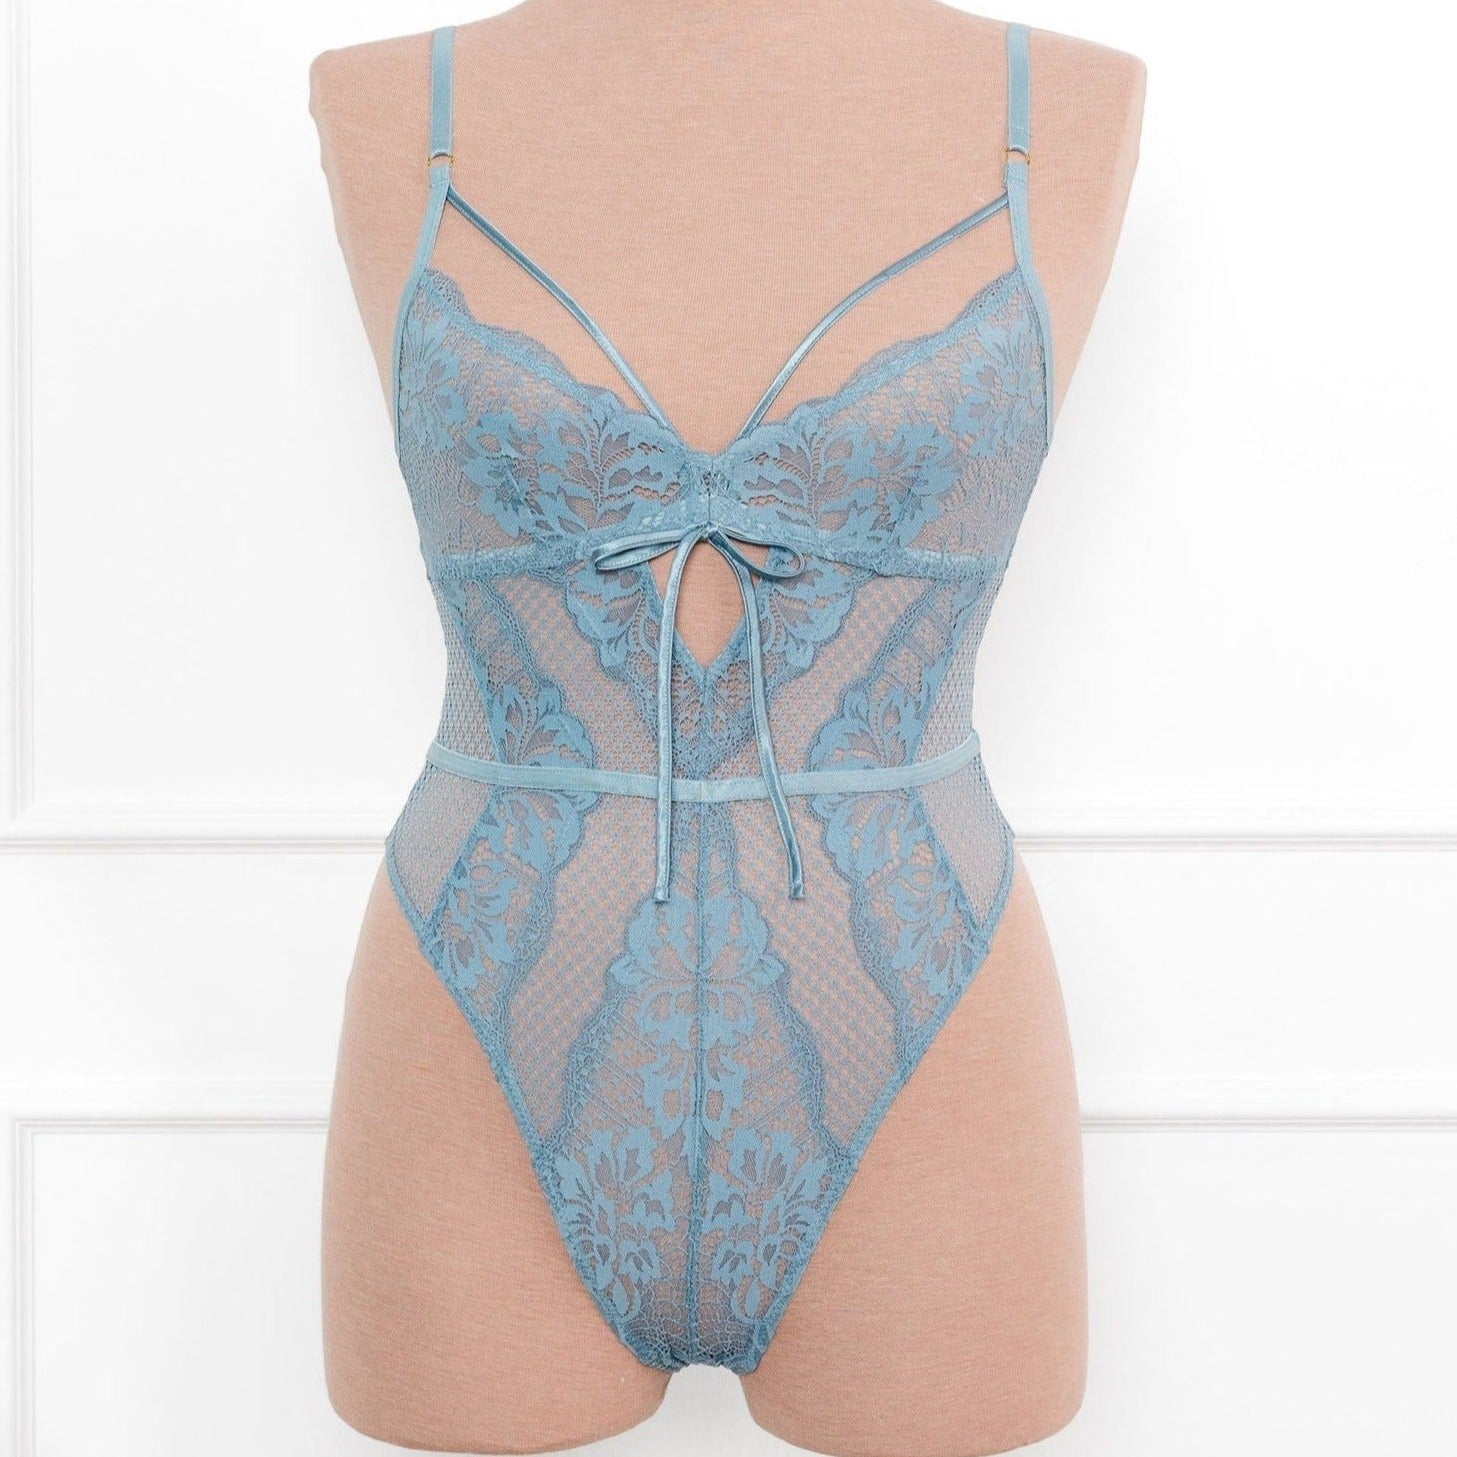 Lacy Caged Crotchless Teddy - Frost Blue by Mentionables